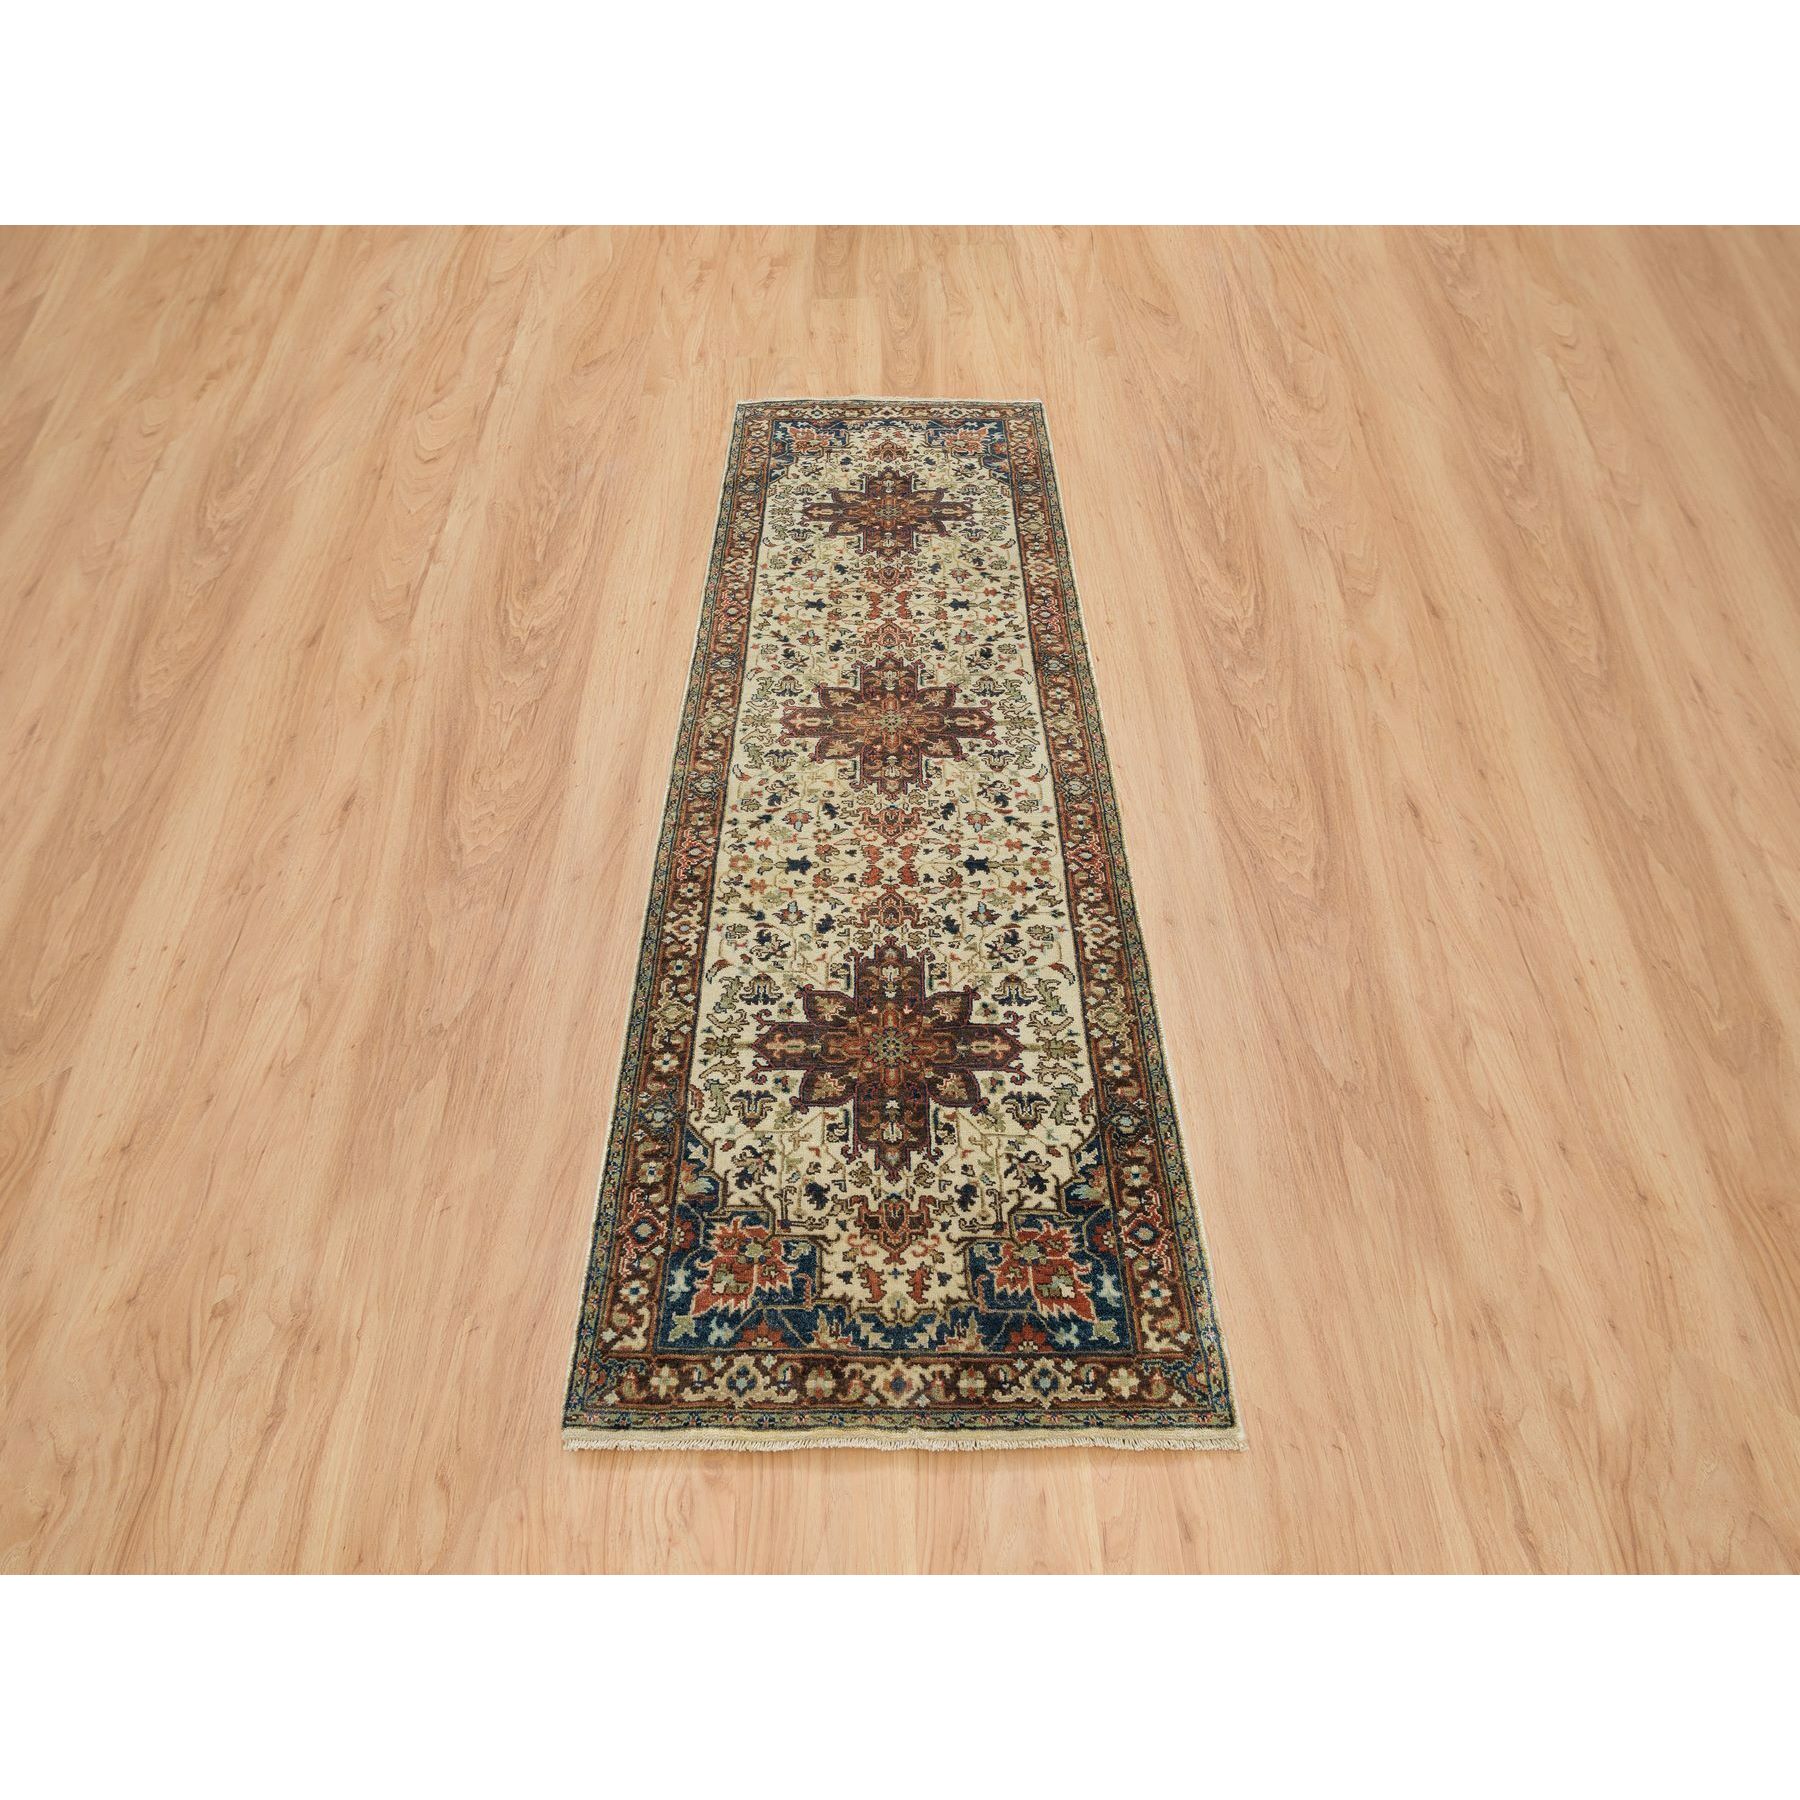 2'8"x8'1" Beige, Hand Woven, Antiqued Heriz Re-Creation with Geometric Medallions, Extra Soft Wool, Oriental, Runner Rug 